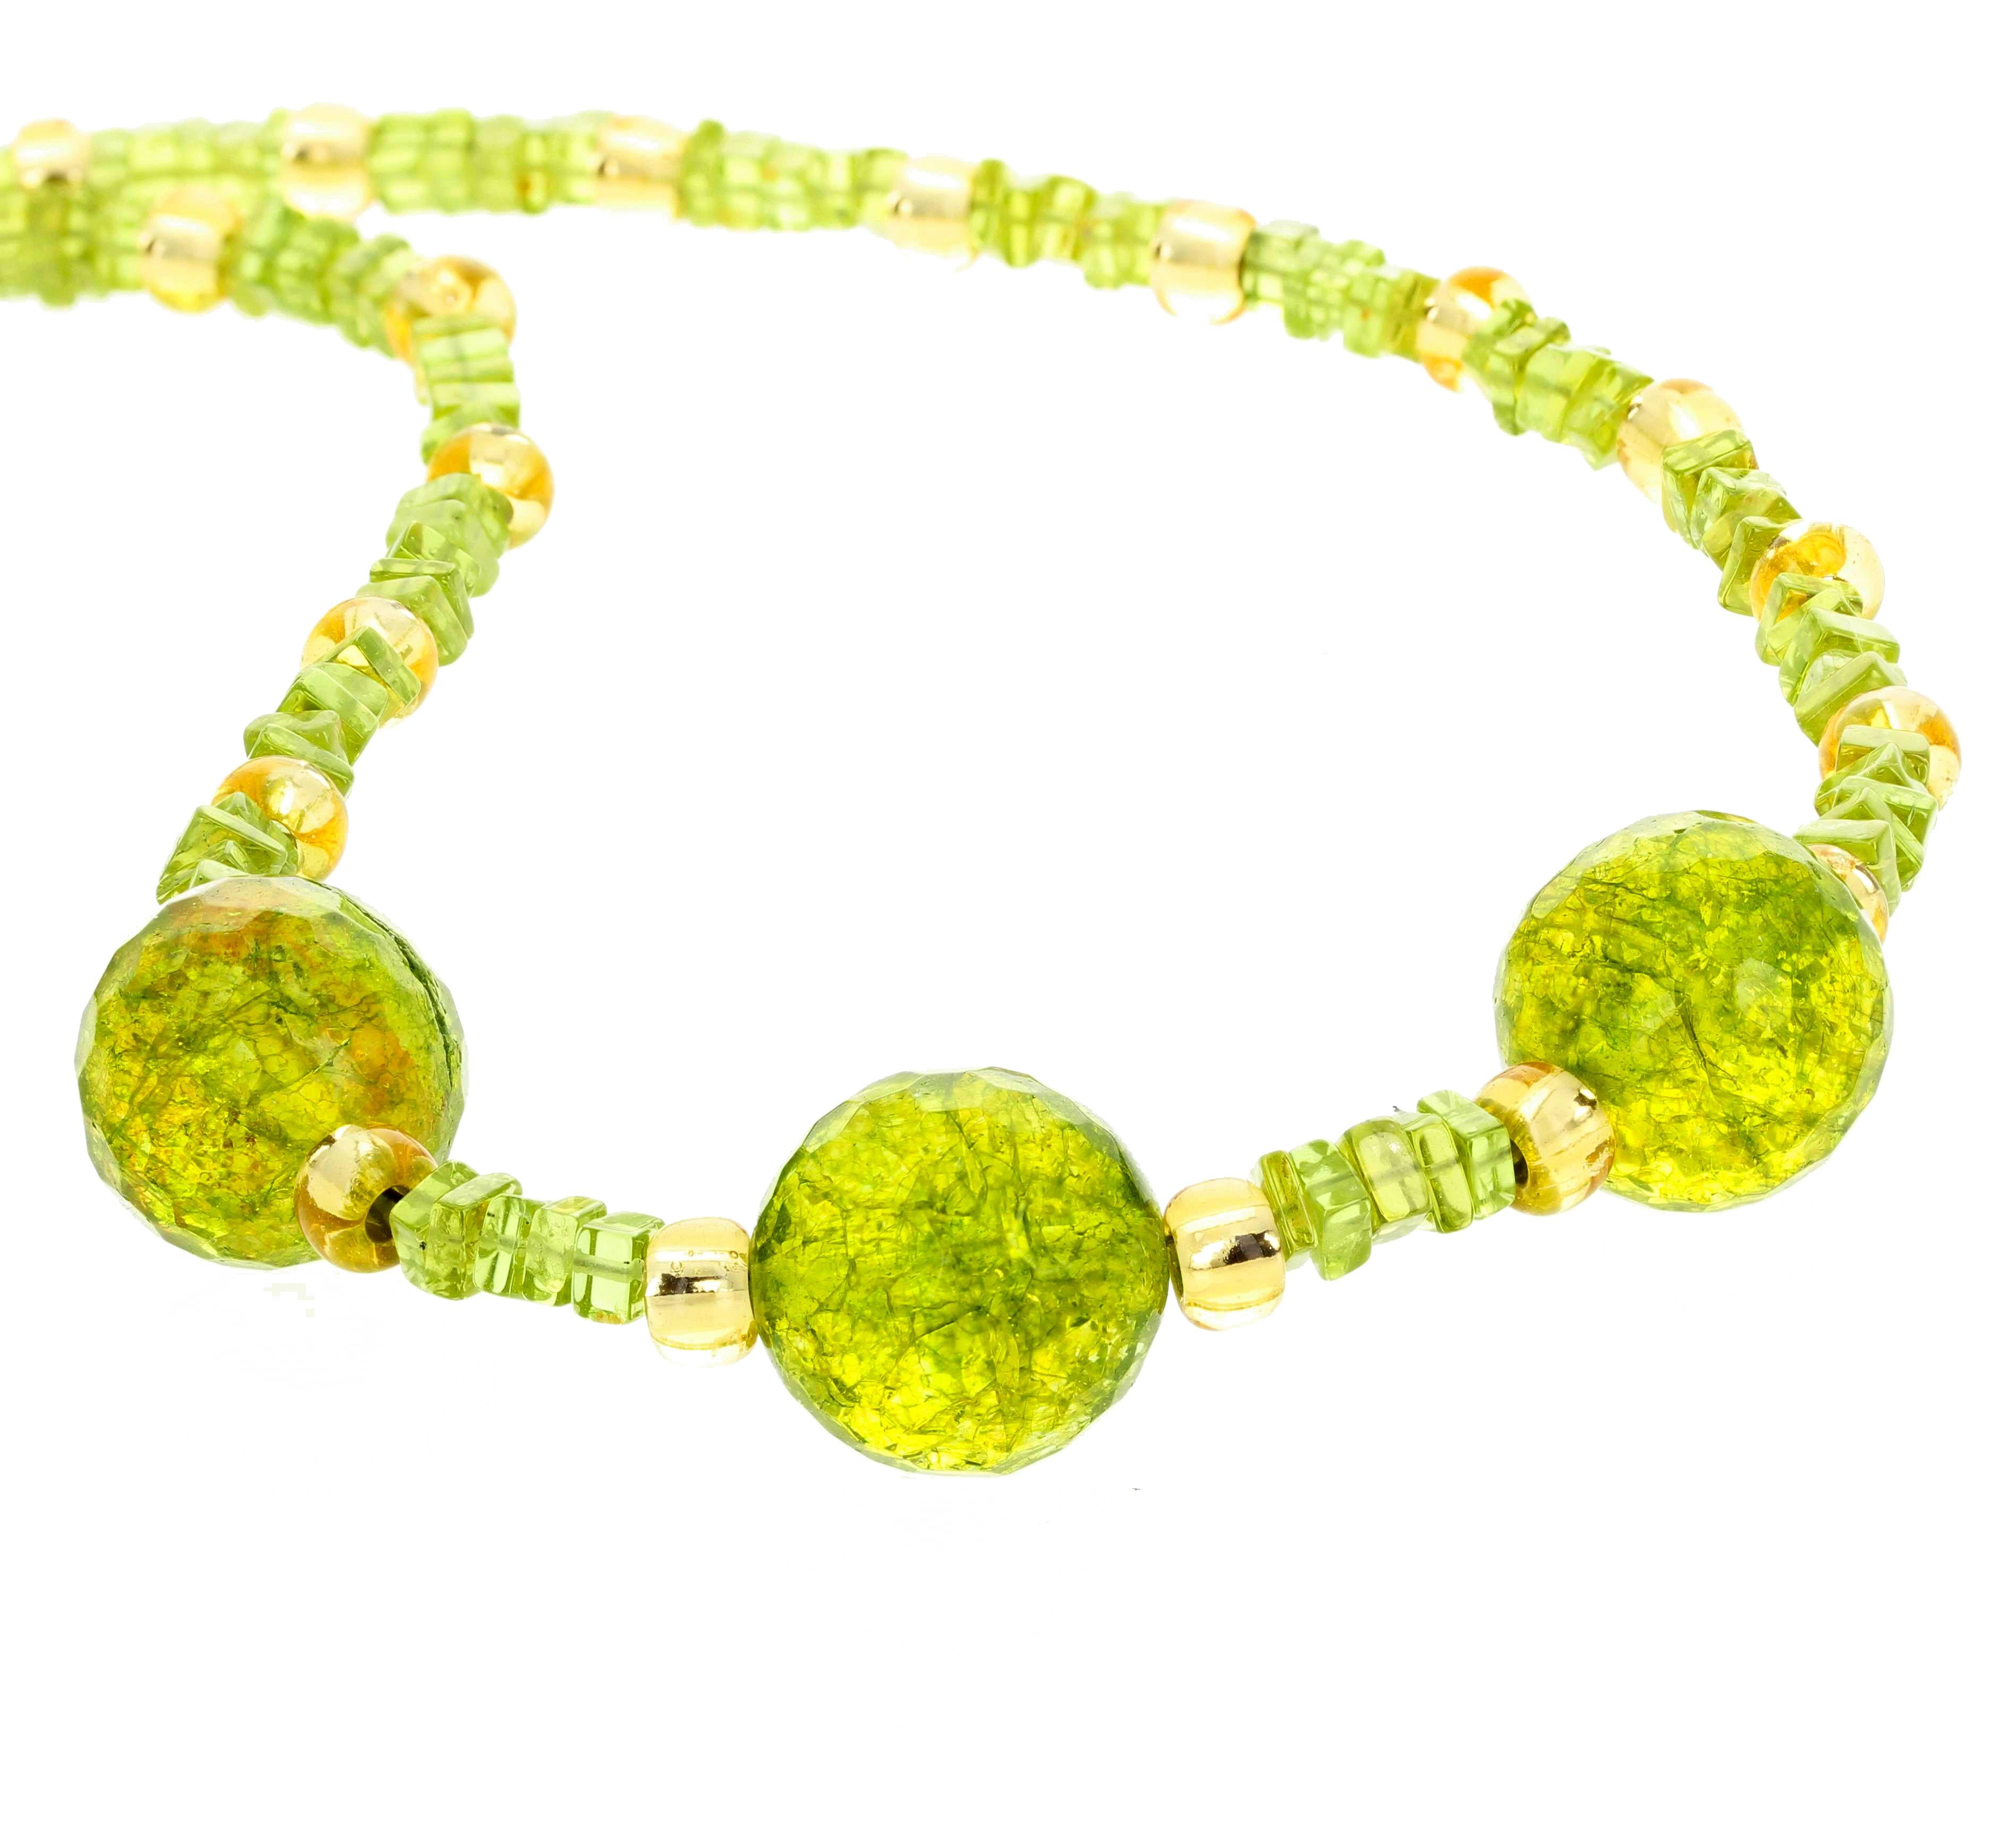 This unique 18 inch long checkerboard gem cut and polished glittering brilliant Peridot necklace is enhanced with sparkly goldy Crystals and set with a hook gold plated clasp.  The larger Peridot are approximately 15mm round and the smaller cube